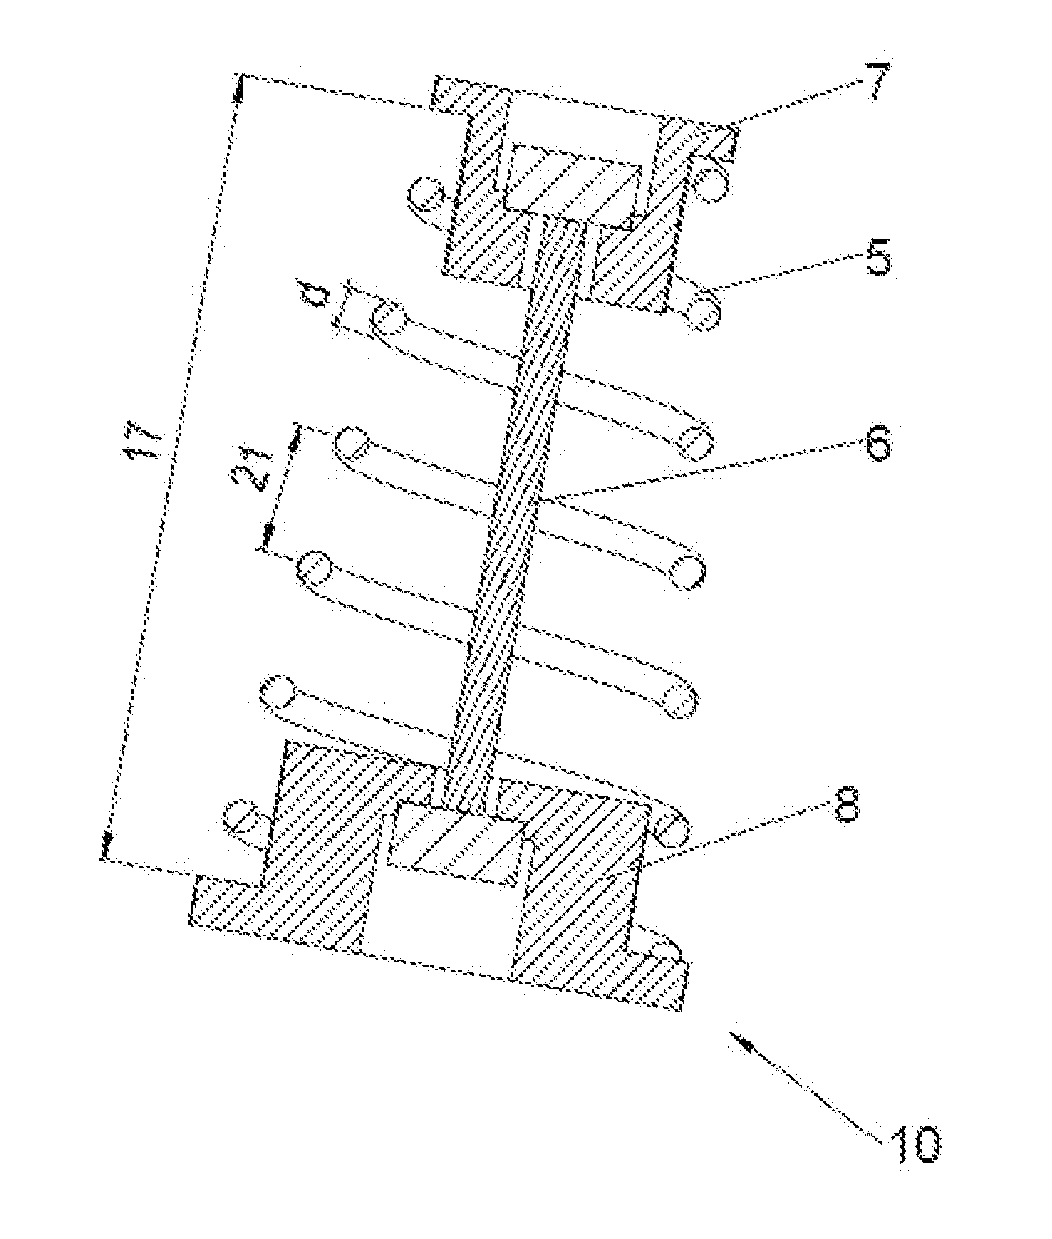 Efficient energy accumulation element for actuators and other devices